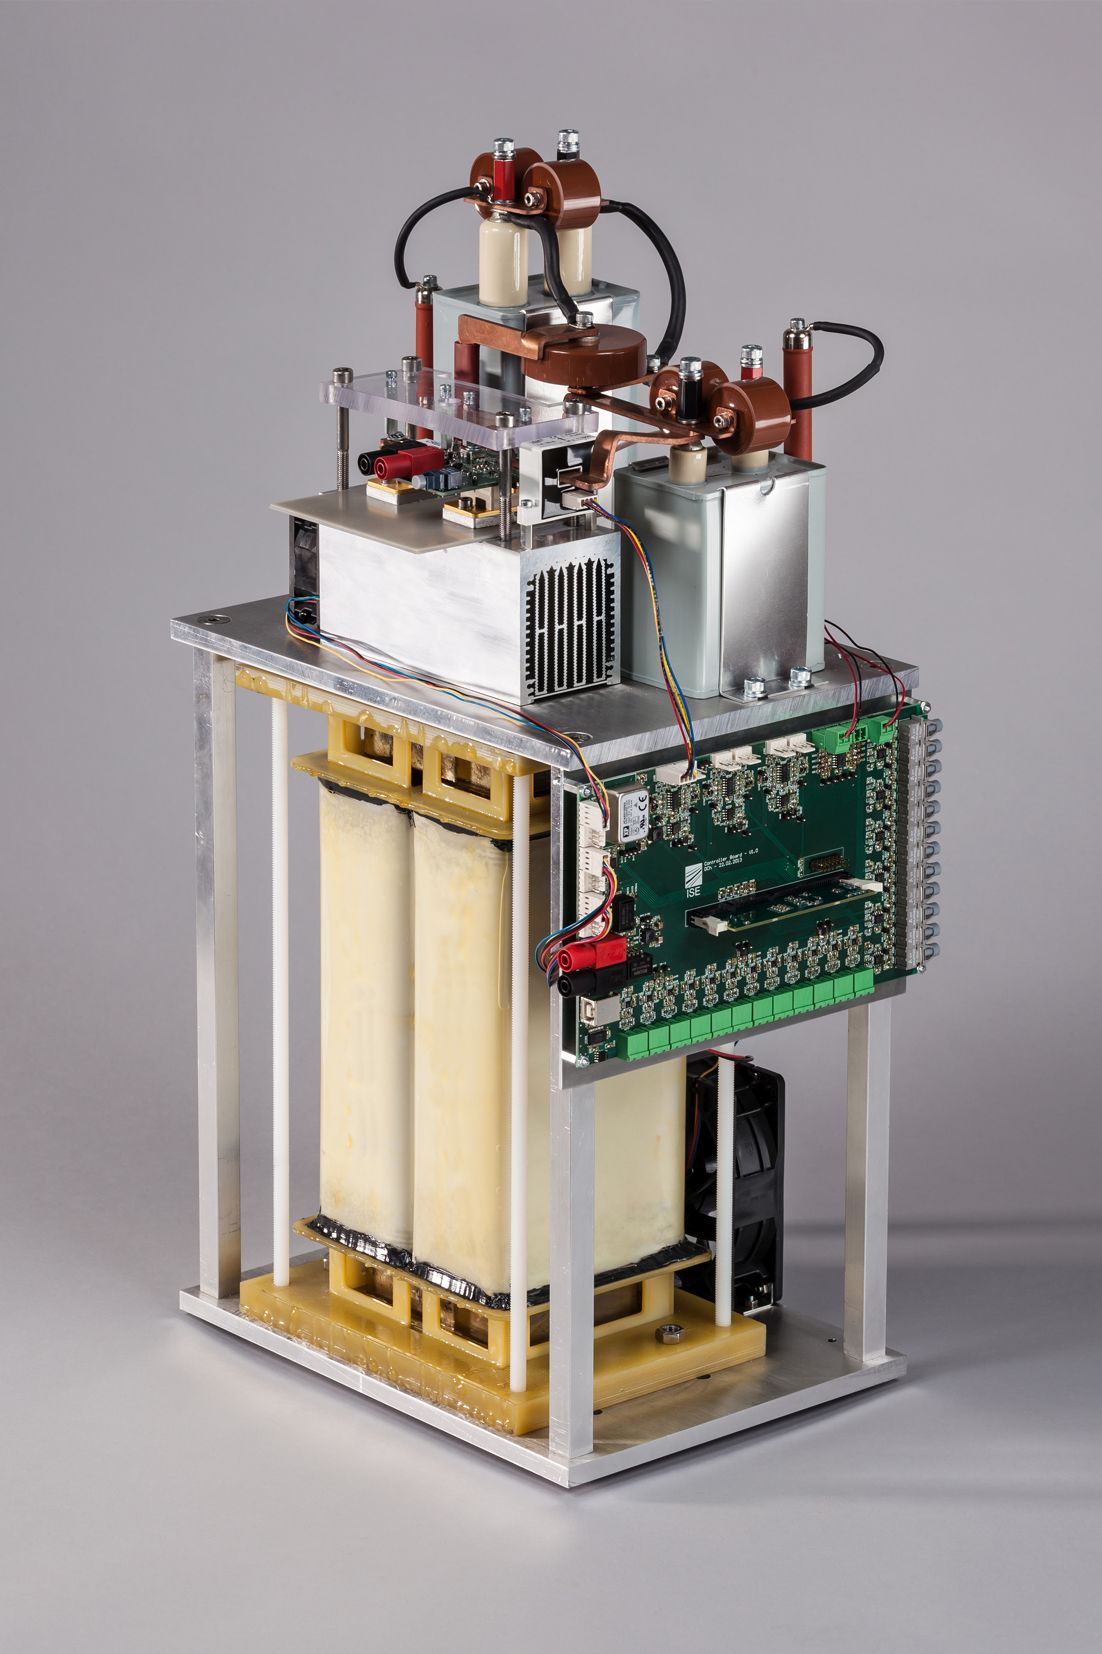 30 kW medium-voltage DC-DC converter, developed at Fraunhofer ISE, contains 10 kV devices made of silicon carbide (SiC).